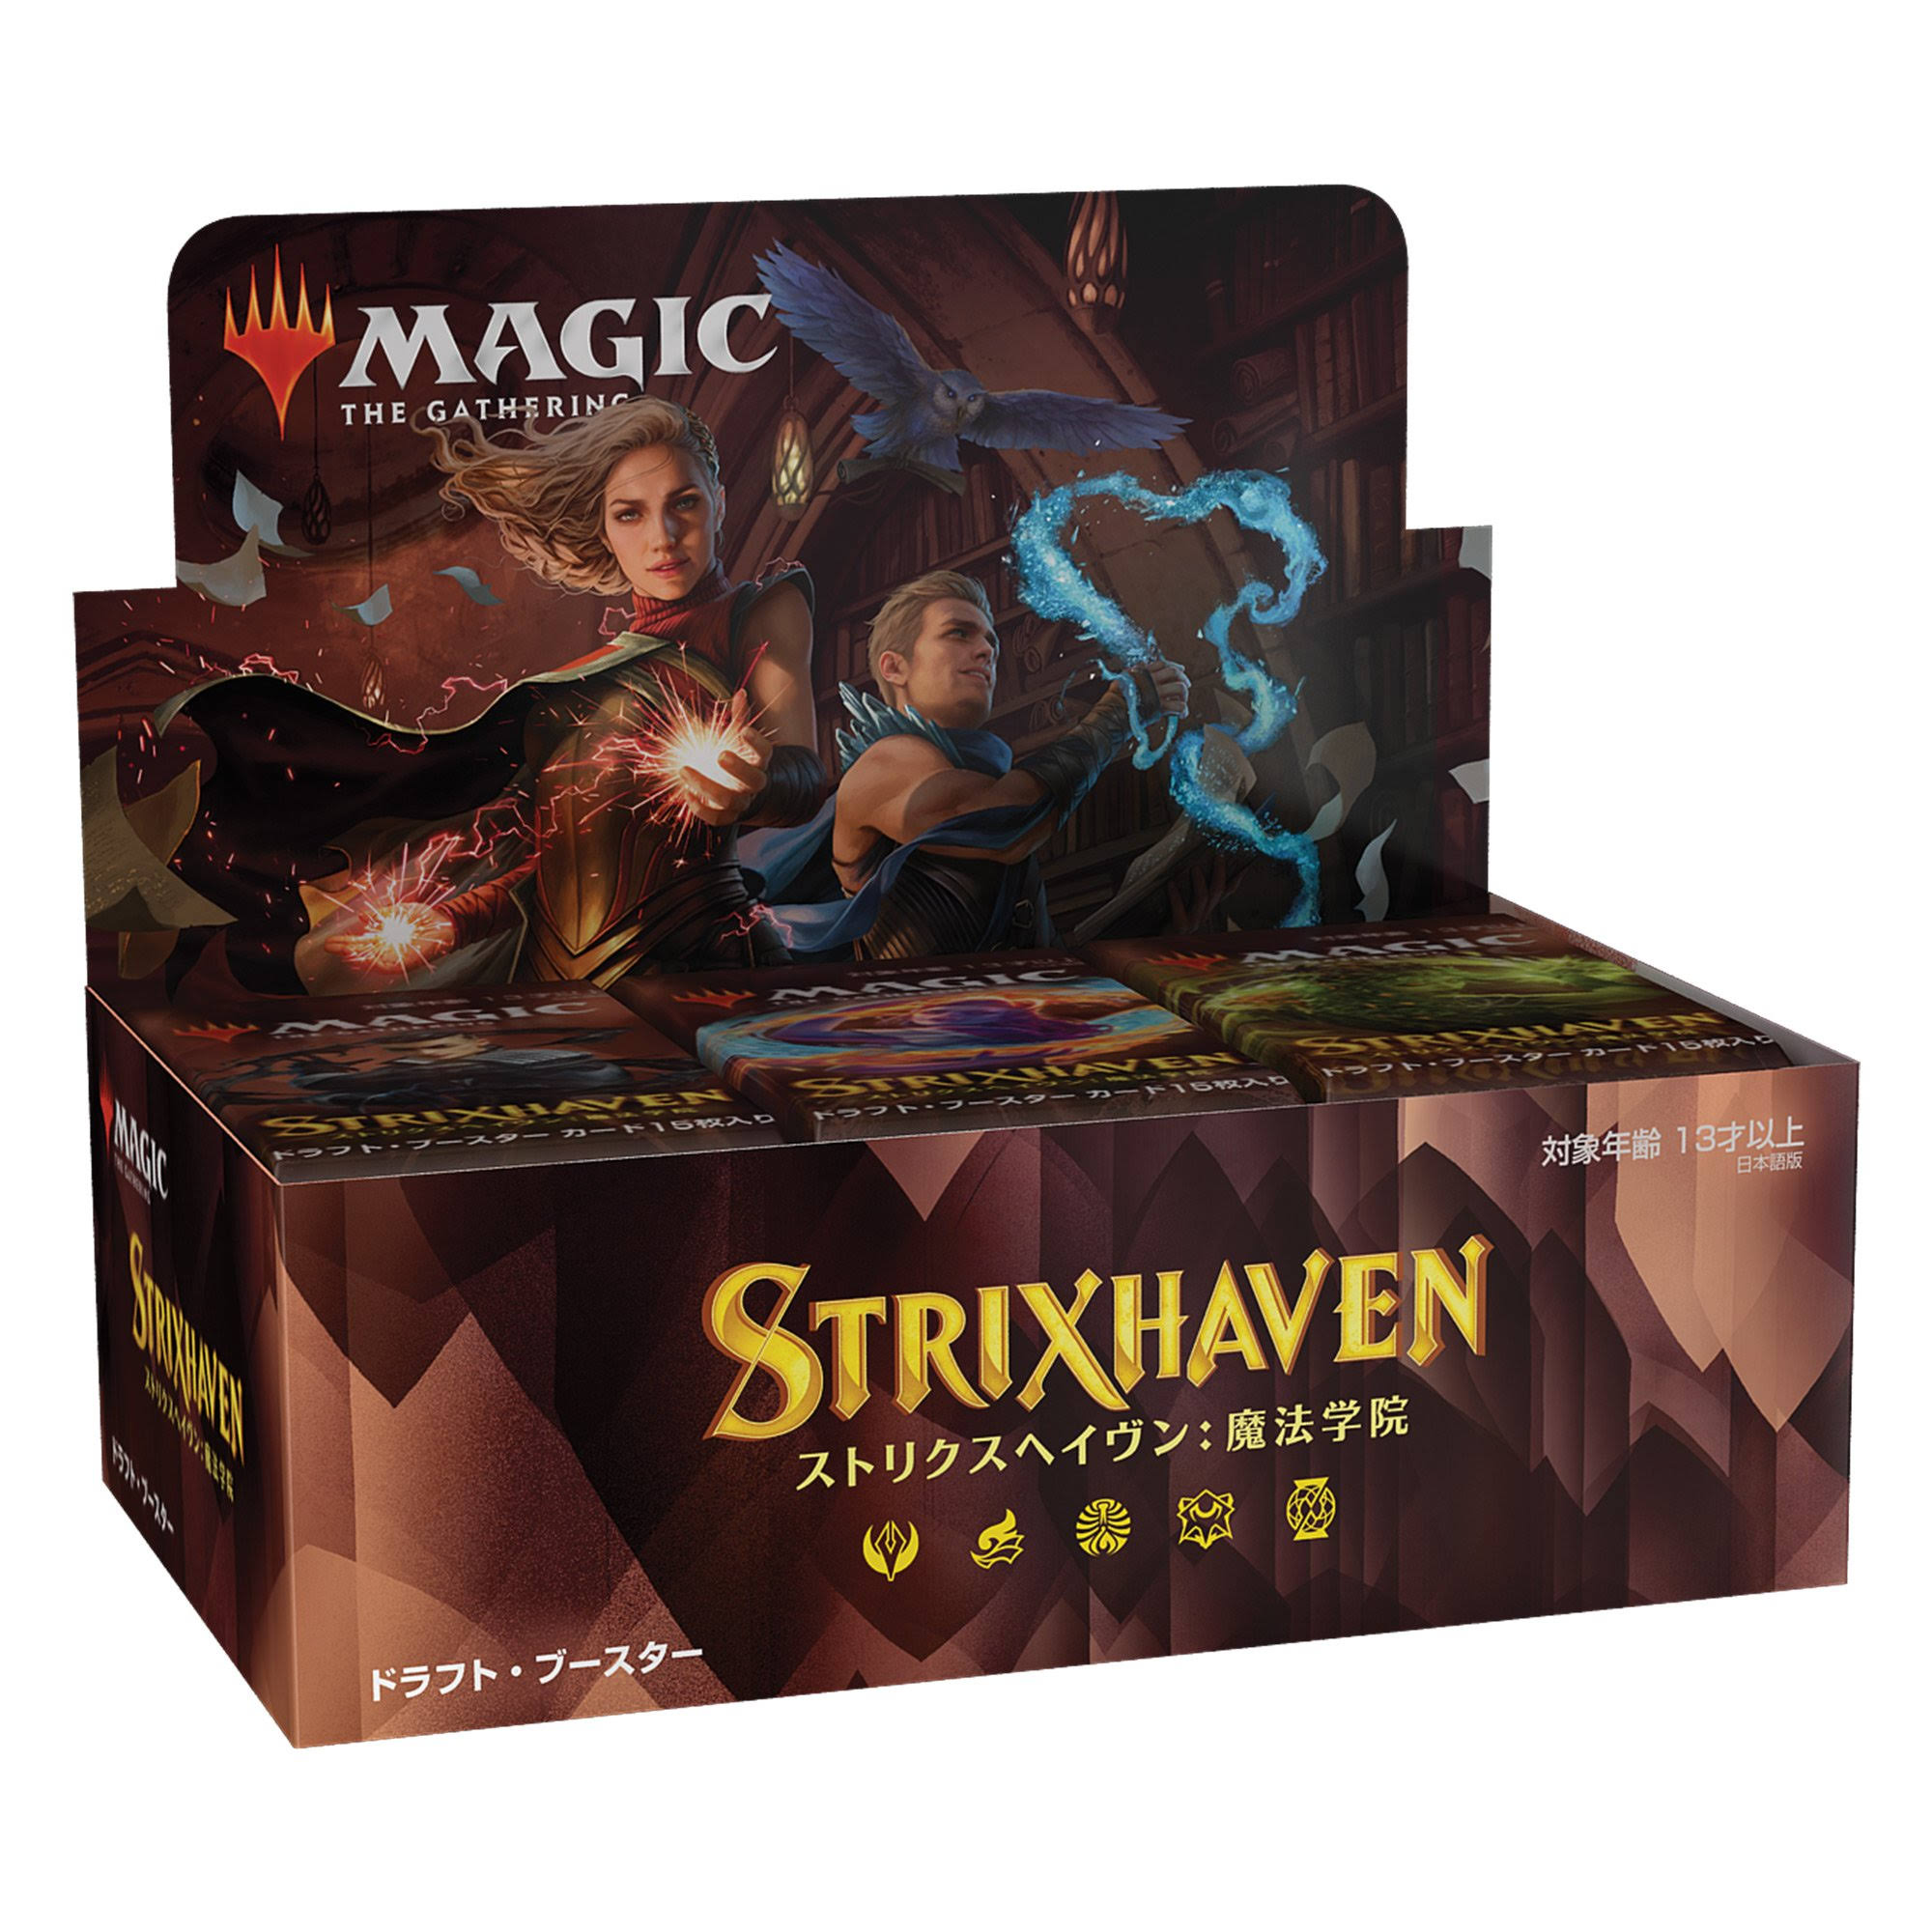 Magic: The Gathering Strixhaven: School of Mages Set Booster Box [Japanese]